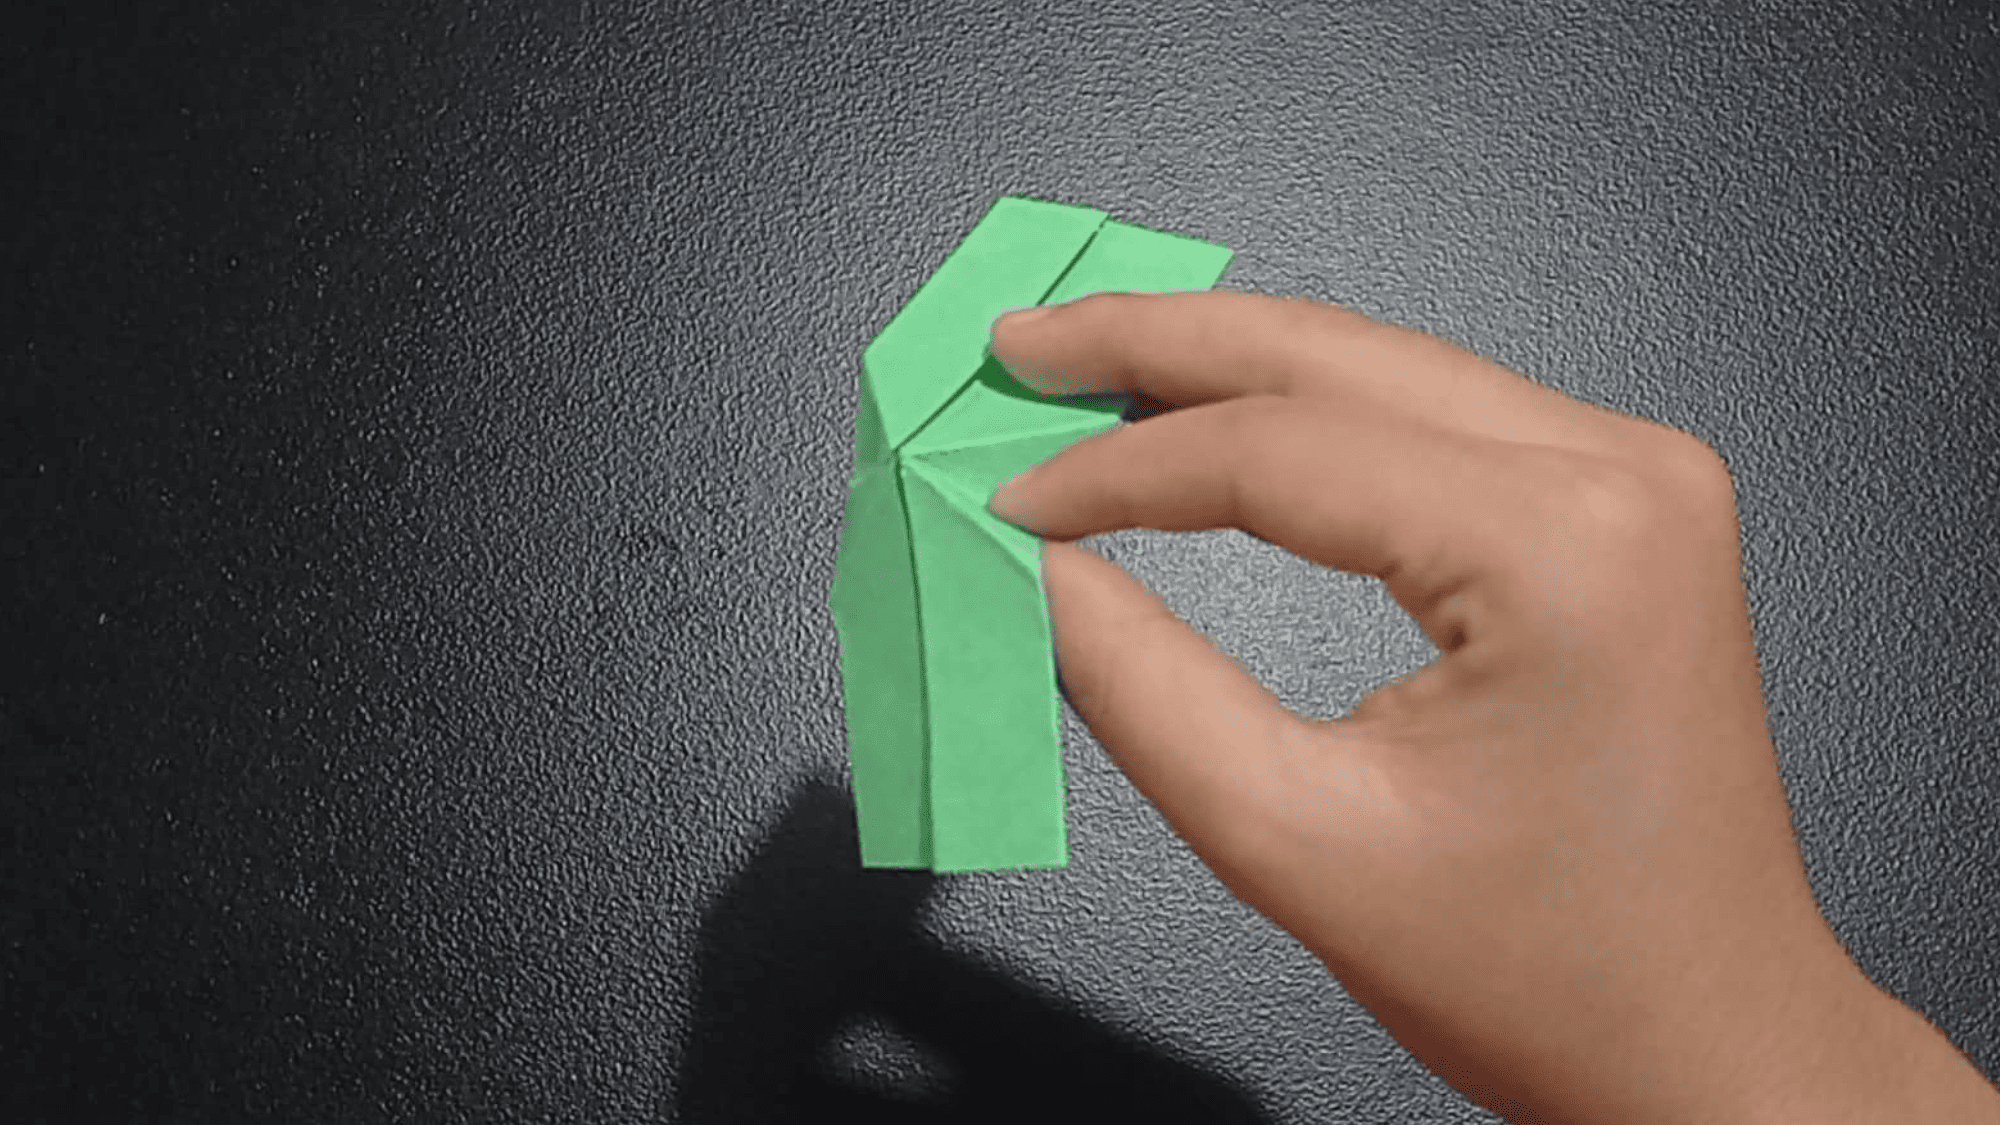 origami ring instructions step 6.1